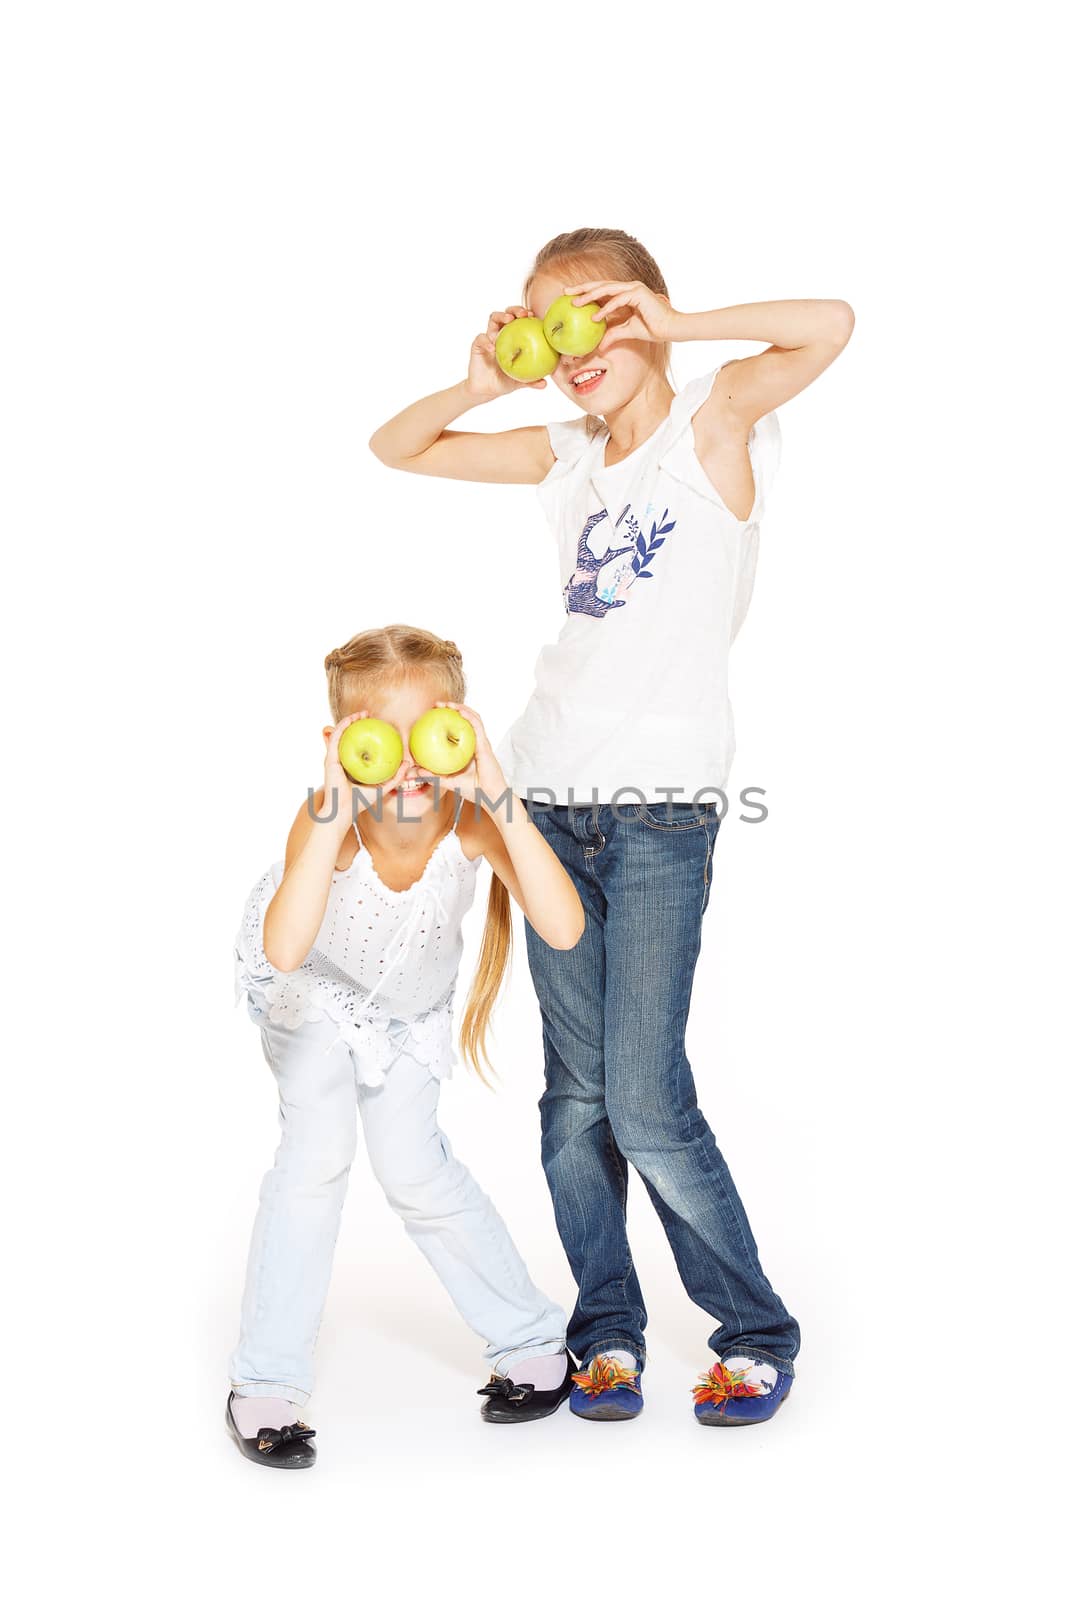 Beauty young girls with fresh apples. Healthy lifestyle. Happiness. White background.